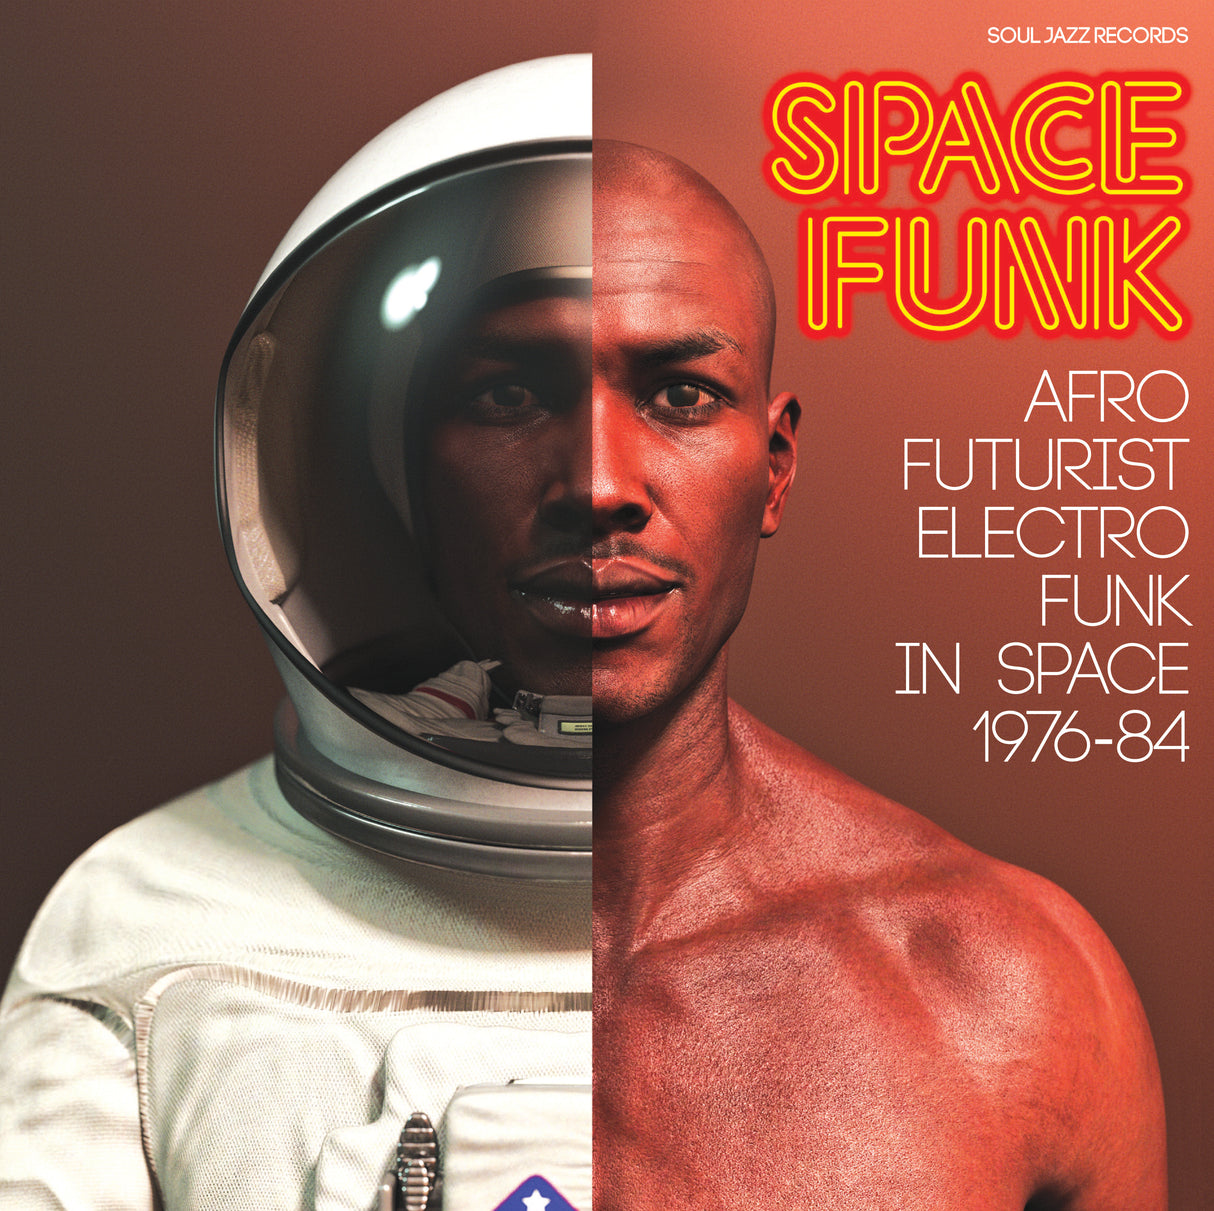 Soul Jazz Records Presents - Space Funk - Afro Futurist Electro Funk In Space 1976-84 [CD]